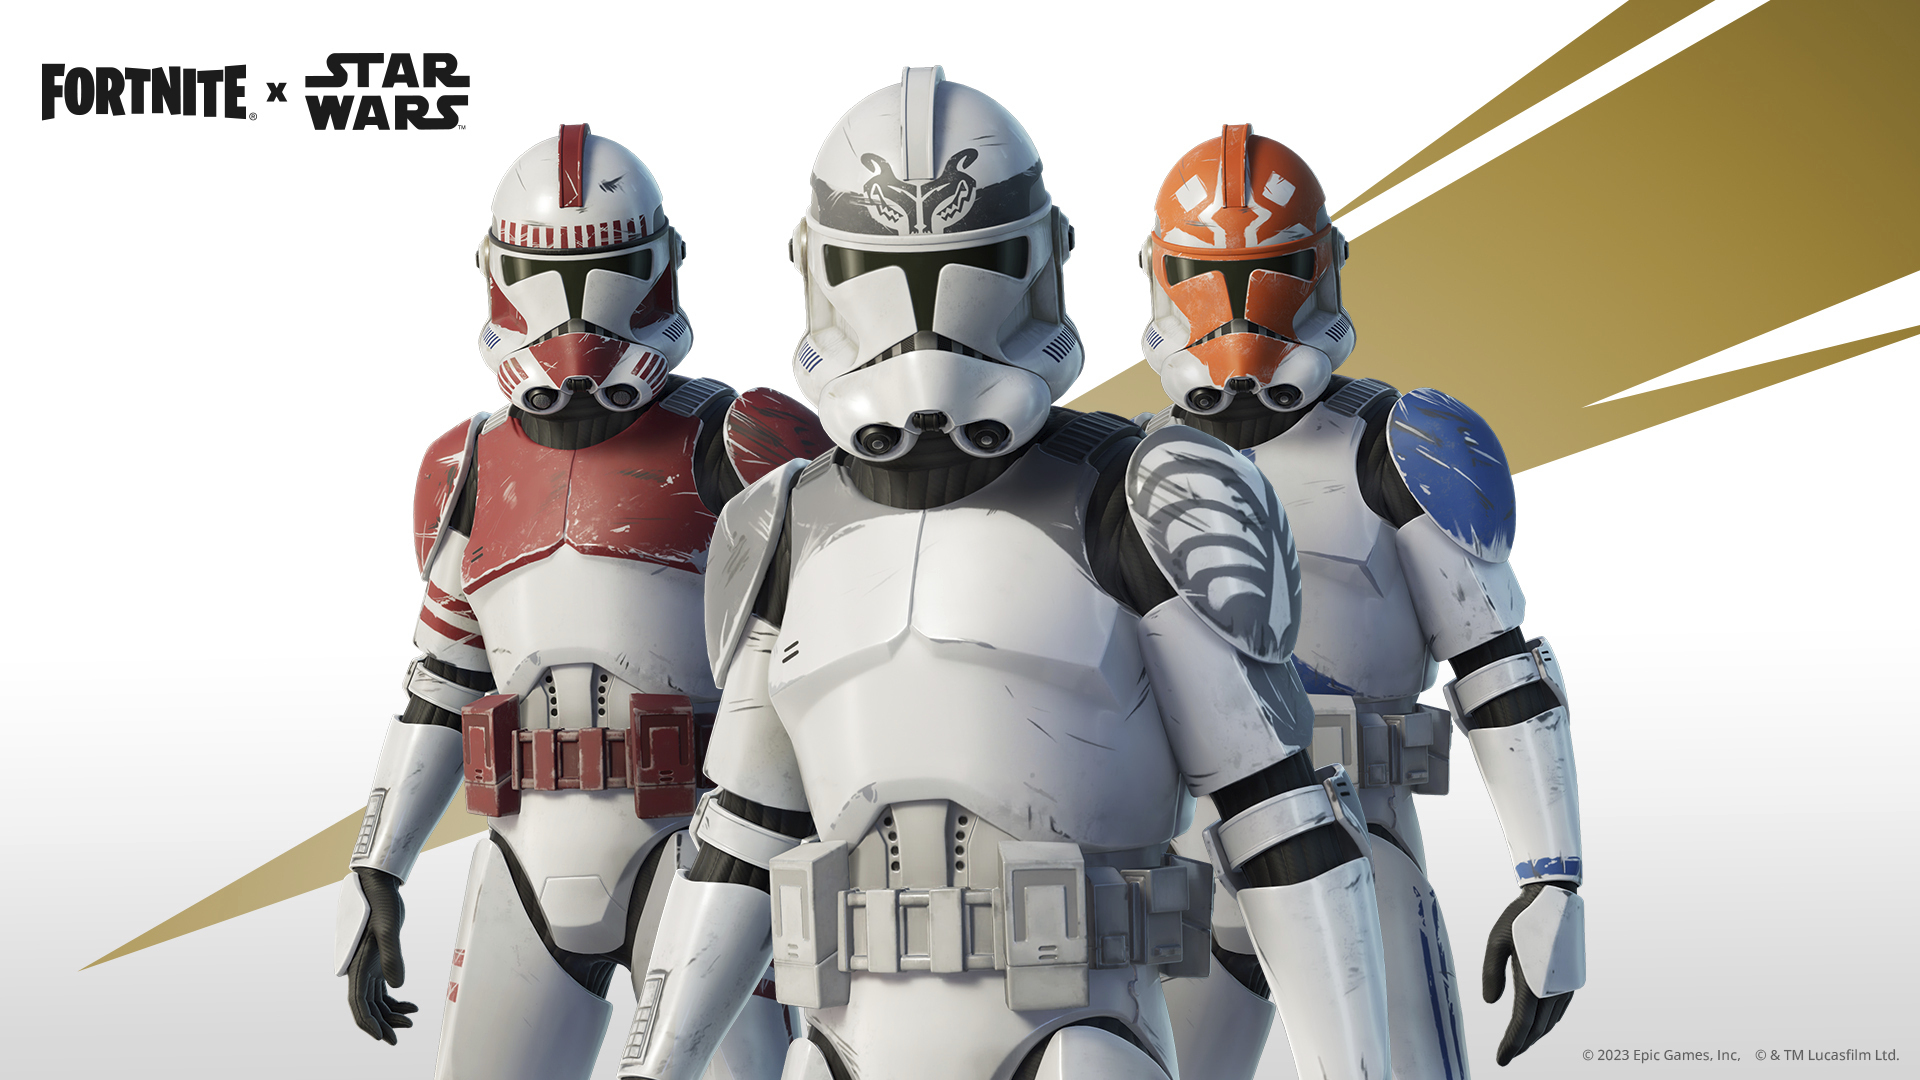 Fortnite's Star Wars Event Adds Force Powers, Mini Battle Pass, And A